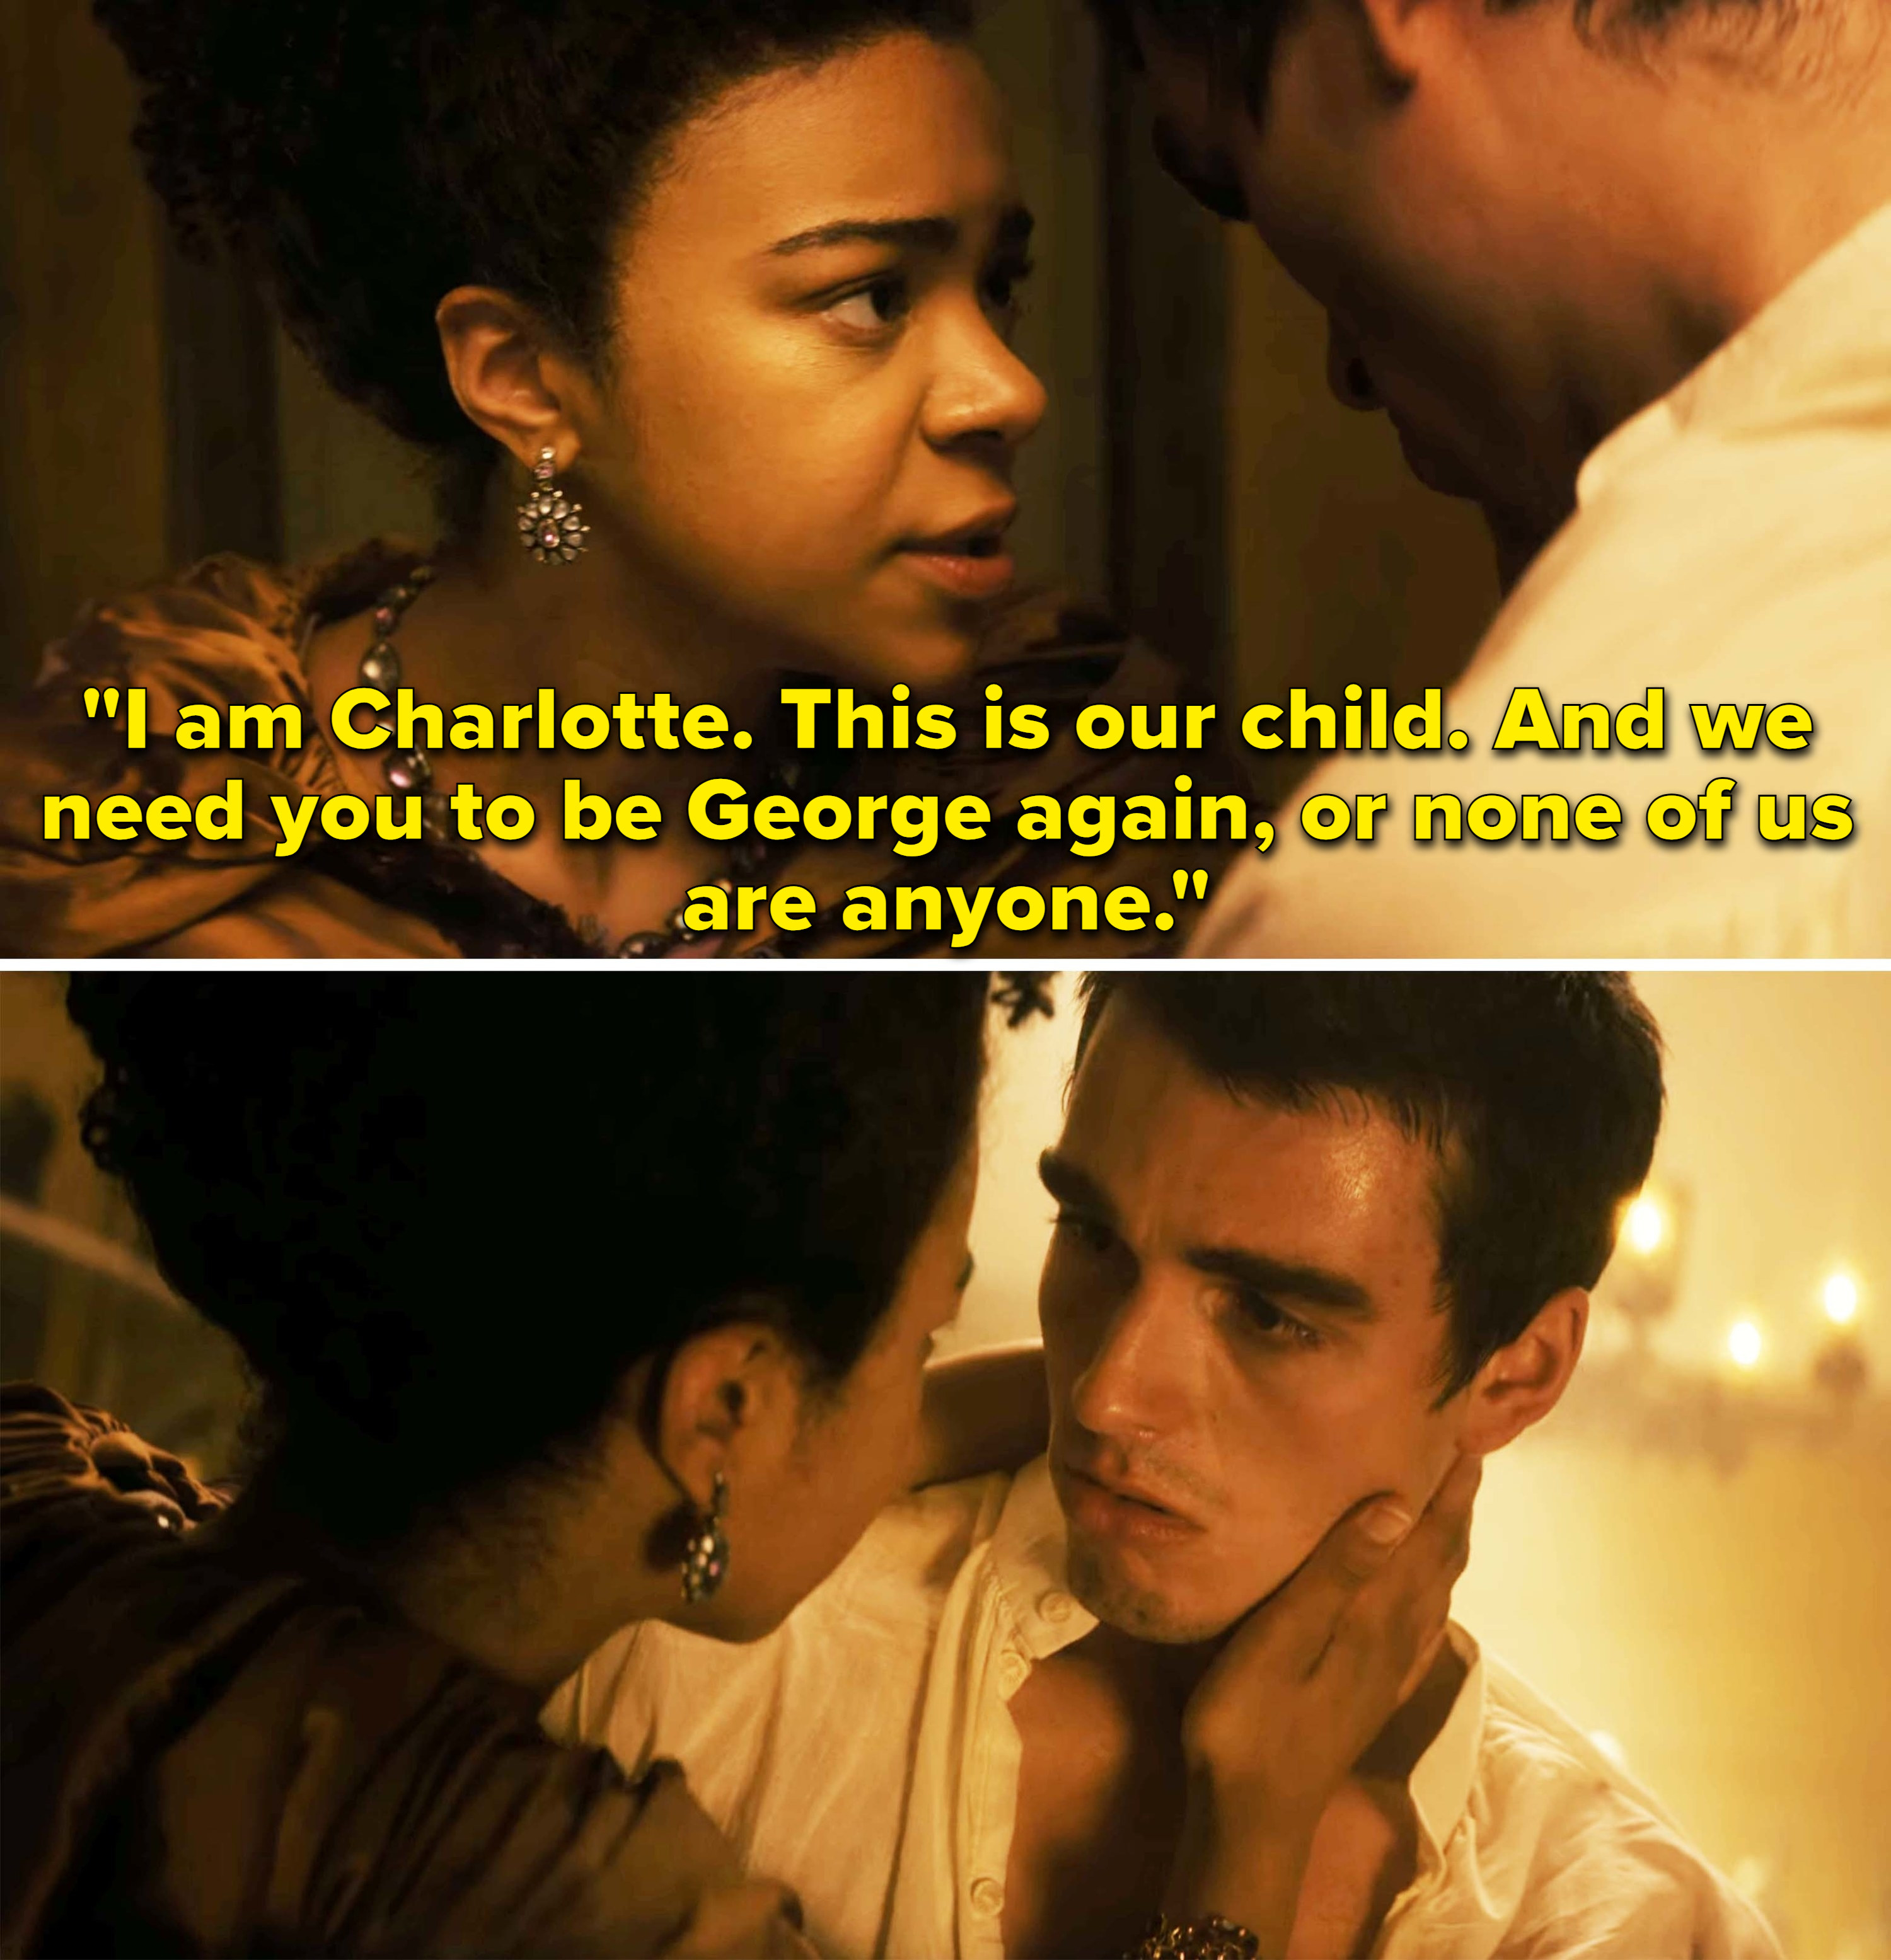 charlotte saying, i am charlotte, this our child, and we need you to be george again, or none of us are anyone